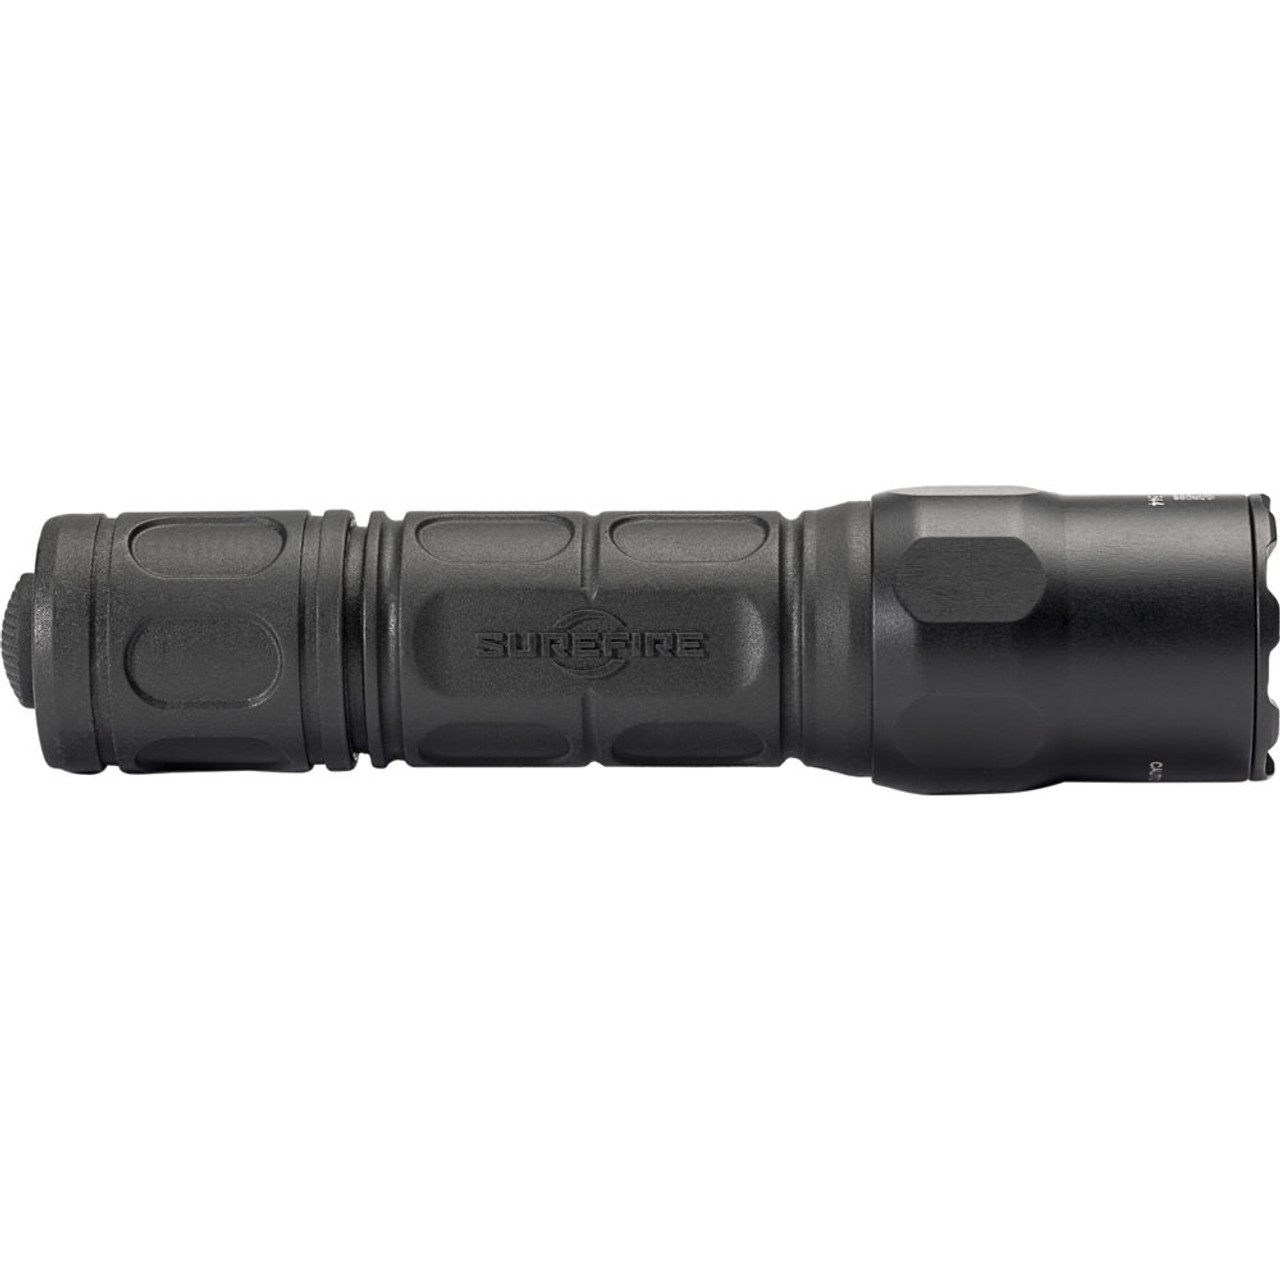 Surefire G2X MV Dual-Output LED Flashlight with MaxVision Beam SGT TROYS